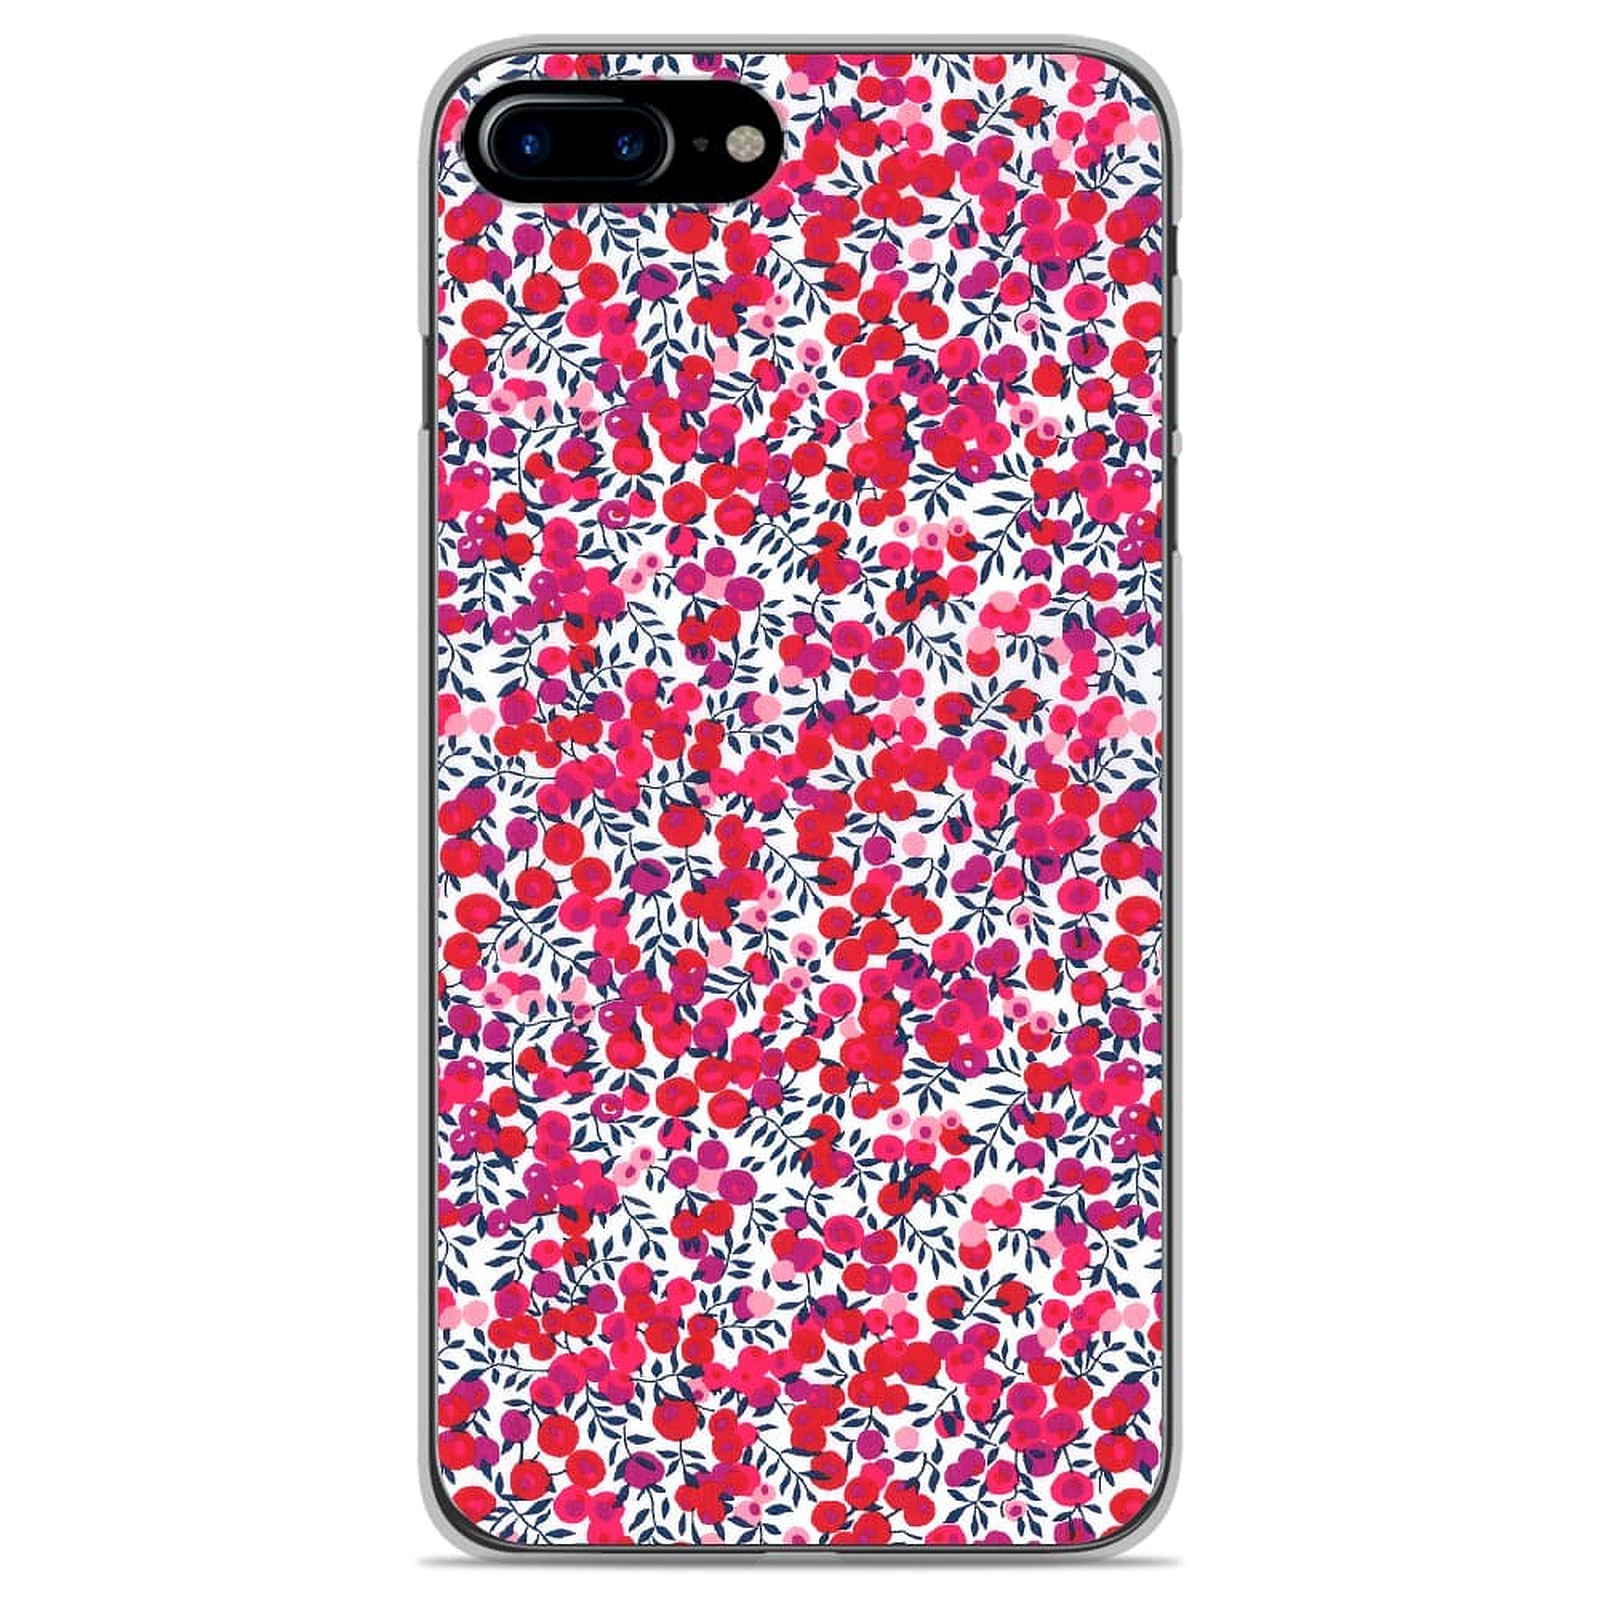 1001 Coques Coque silicone gel Apple iPhone 8 Plus motif Liberty Wiltshire Rouge - Coque telephone 1001Coques